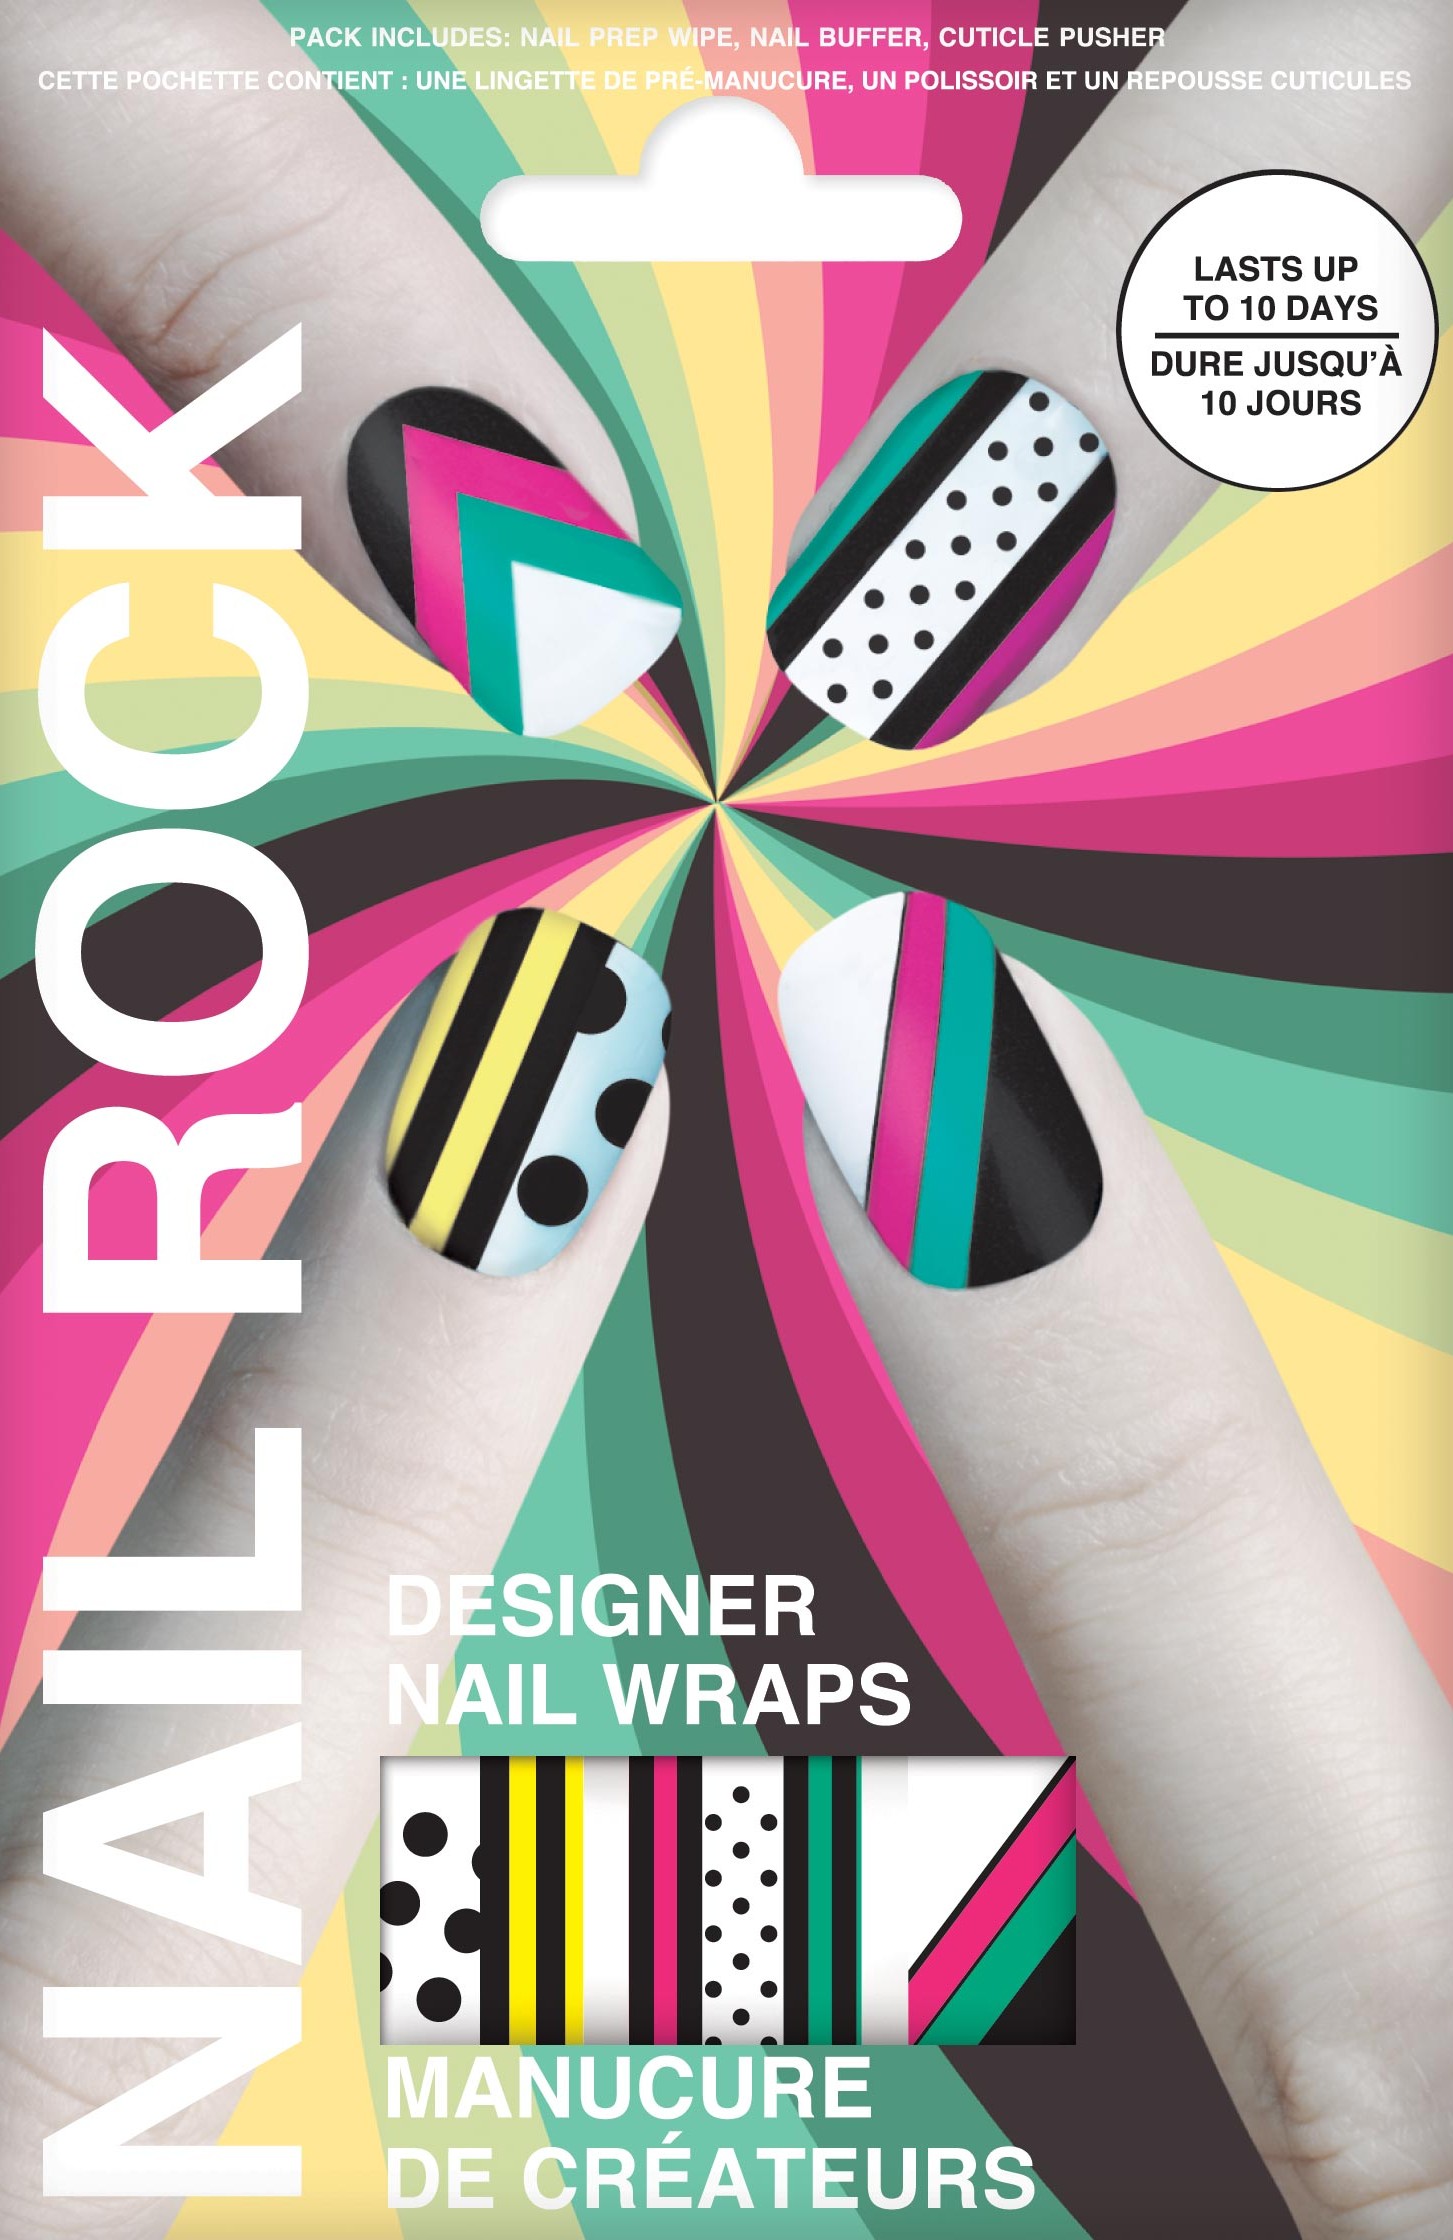 Nail Rock: Spots and Stripes. After collaborating with Oasis and also